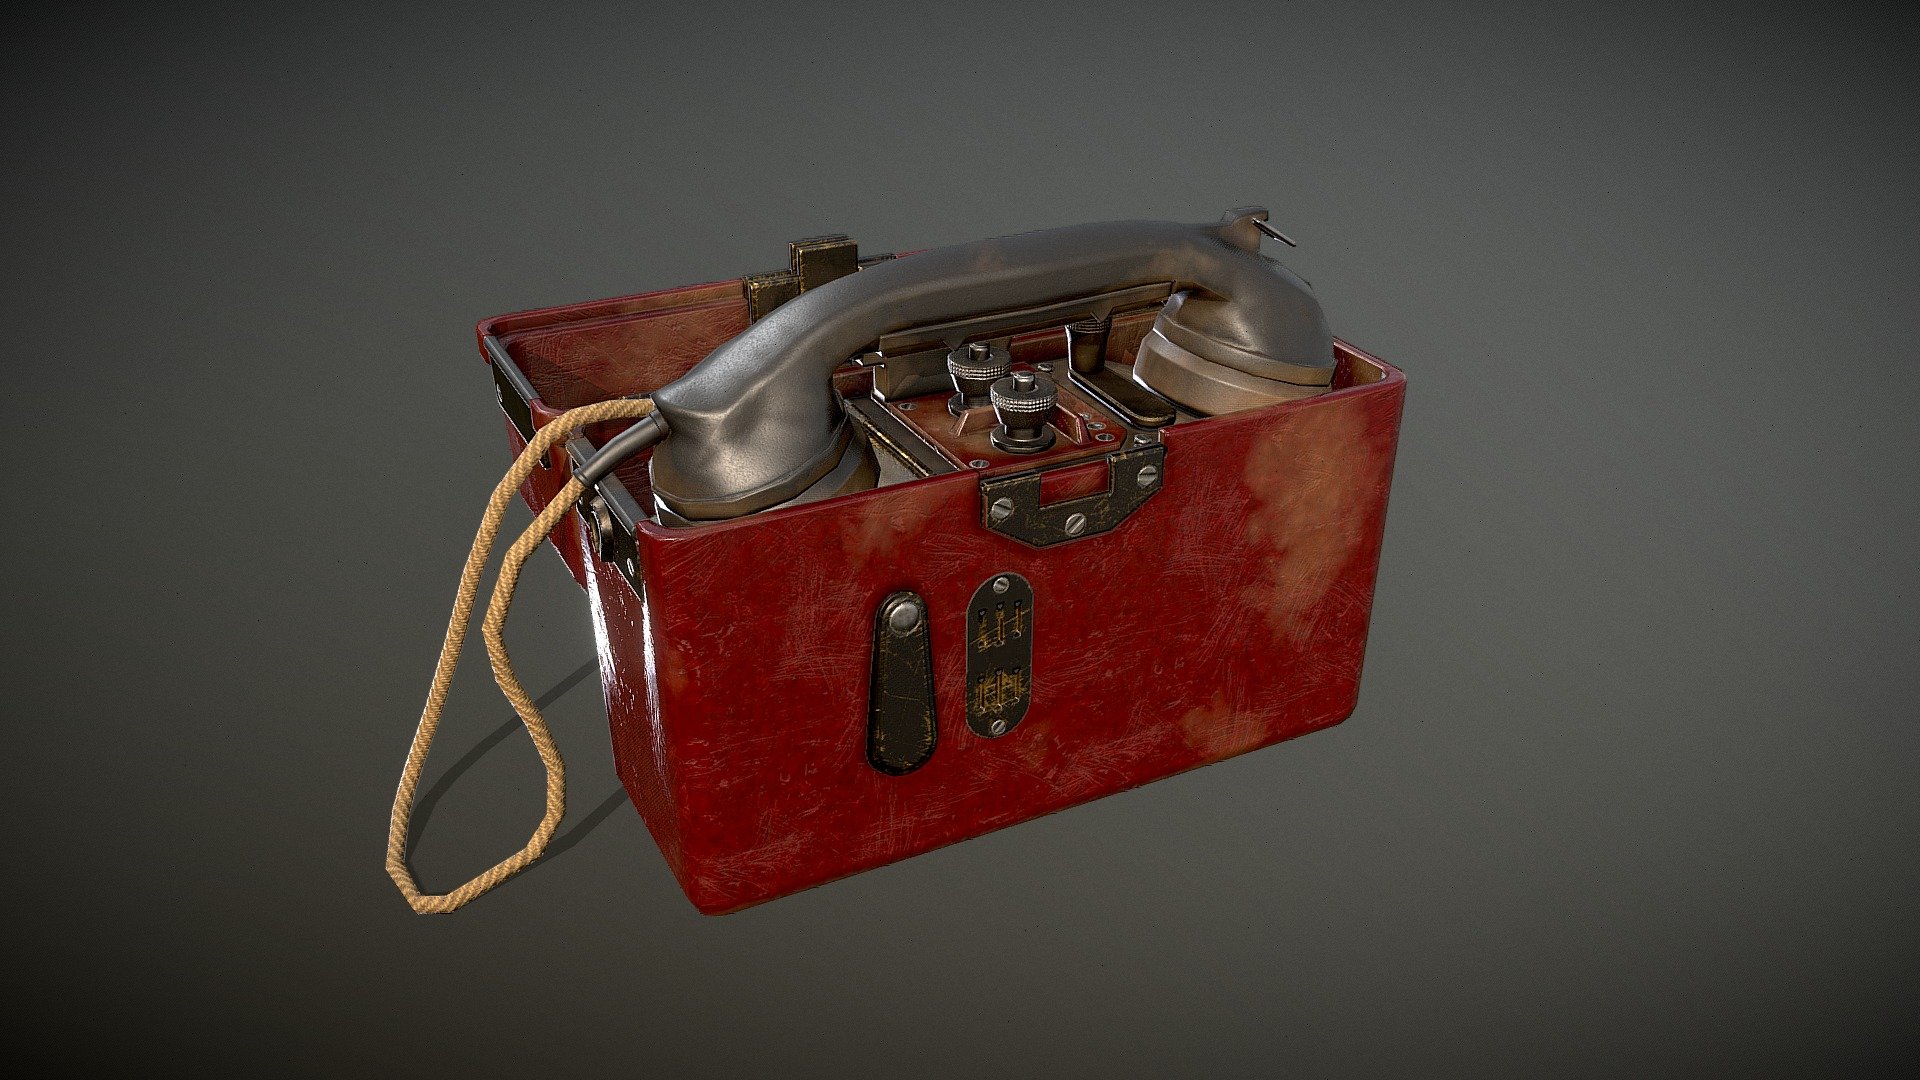 German WWII Feldfernsprecher-33 - Game Ready Asset

Credit and link GRIP420 if you use the model somewhere/somehow.

Model + Textures by: mehrrettig

Website: https://www.grip420.com/

Discord: Follow us on Discord

Facebook Follow us on Facebook

All content included in this purchase must serve merely as a component and not as the primary focus of any product produced using the content included in this purchase, whether for commercial or non-commercial purposes 3d model